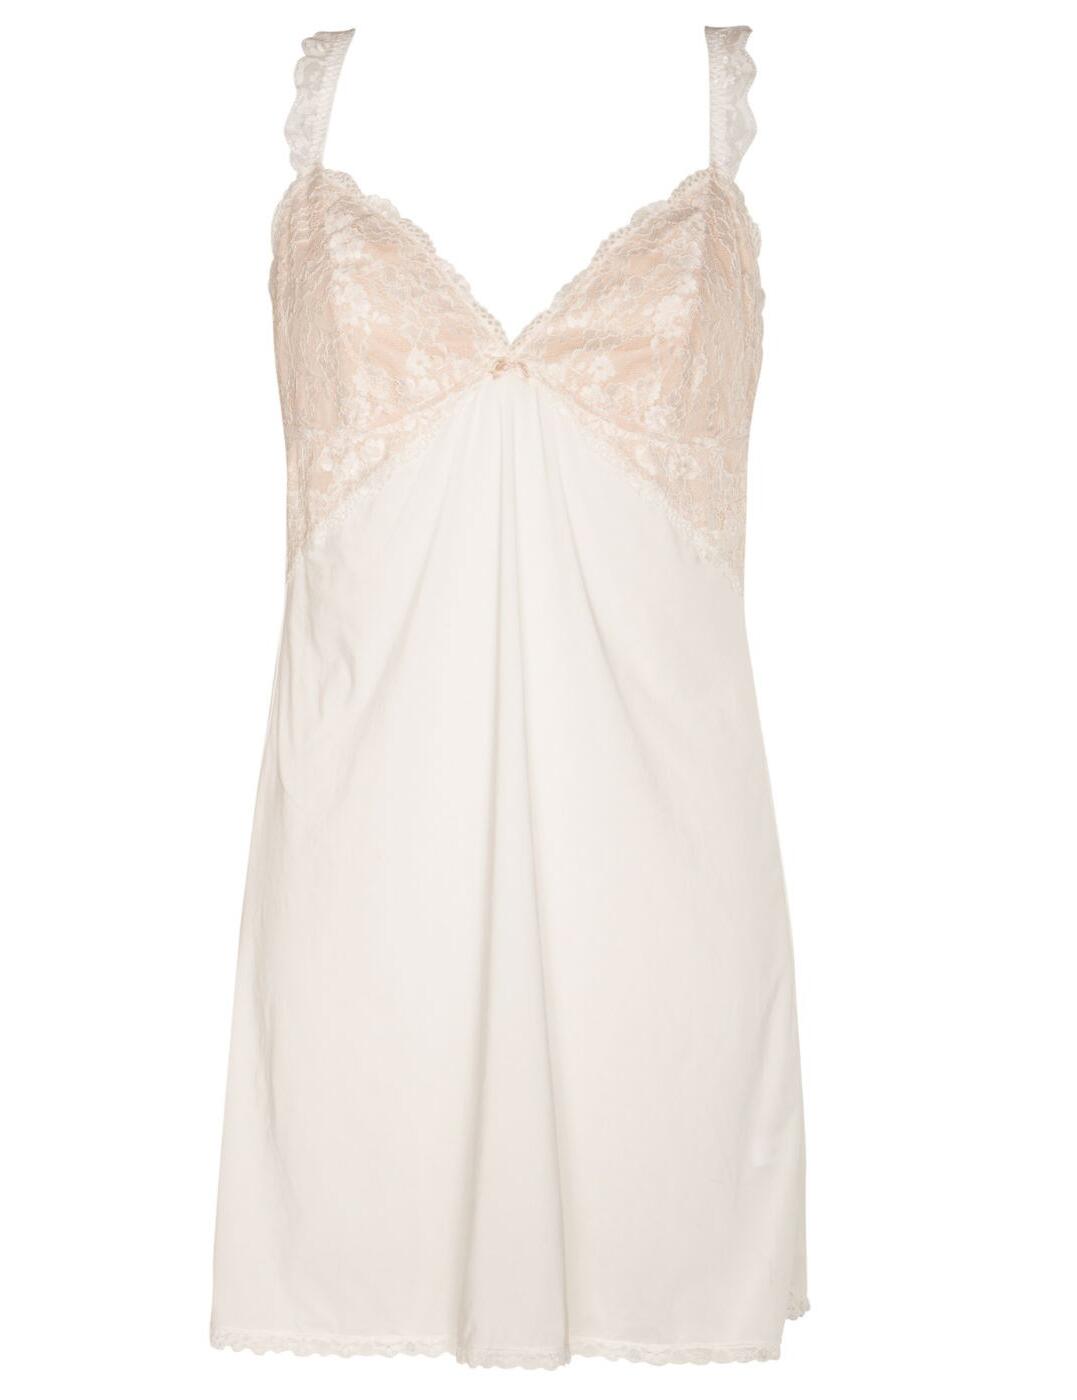 9508 Pour Moi? Love Lace Chemise Nightdress - 9508 Cream/Caramel